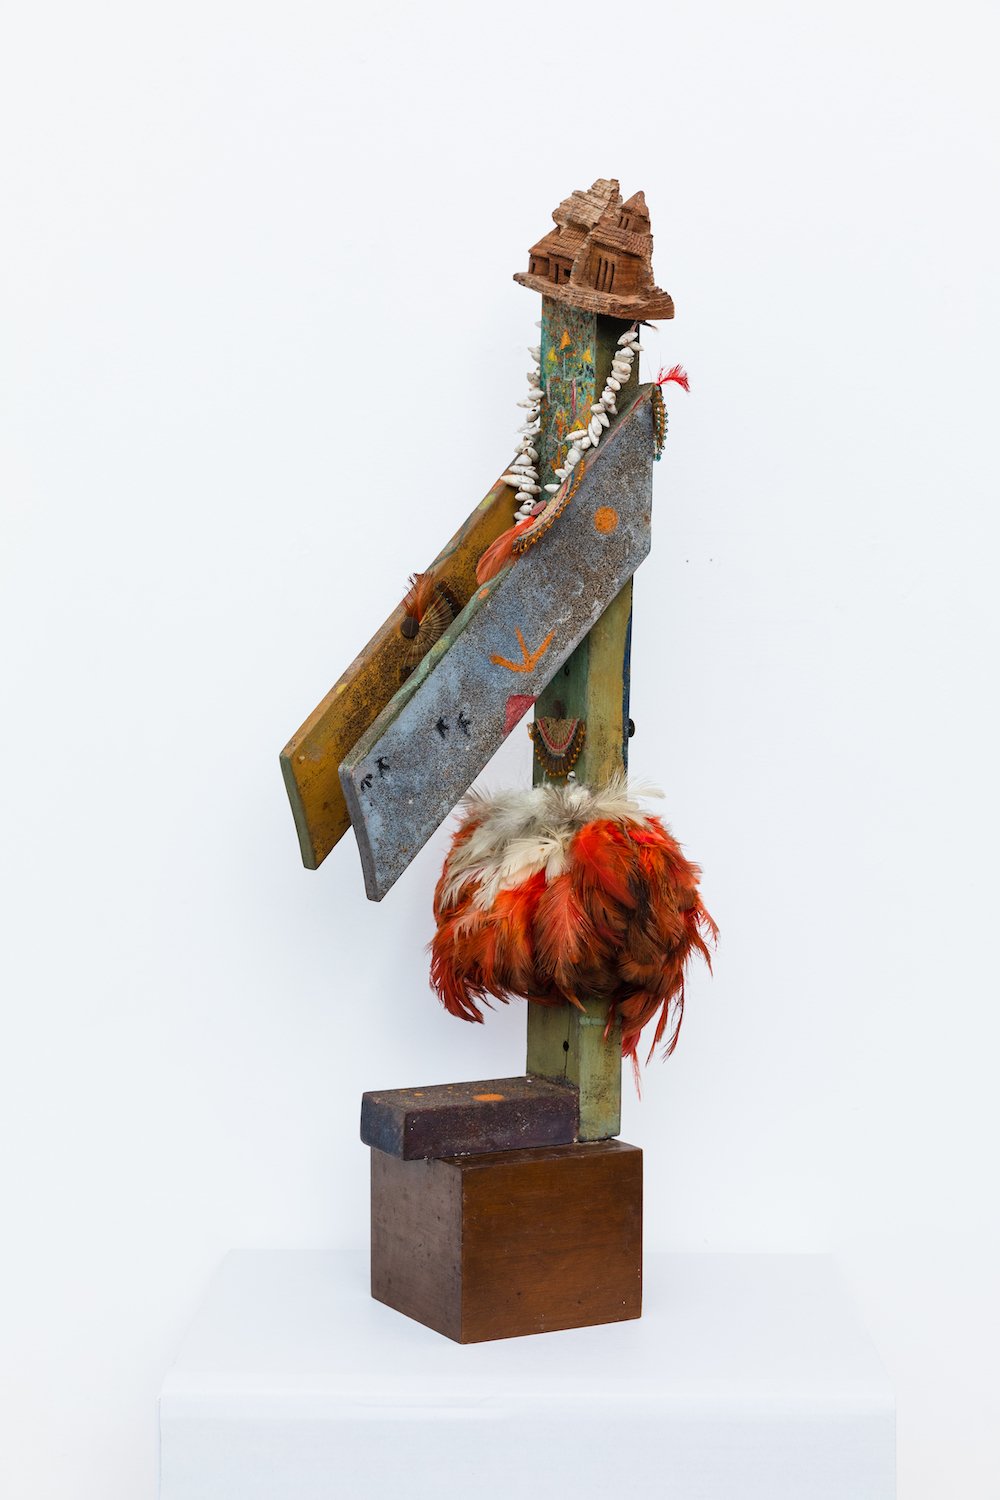  Alice Rahon,  Untitled (side view) , n/d, assemblage with wood, feathers, shells, and oil, 22 x 6 x 7 inches (55.9 x 15.2 x 17.8 cm) 